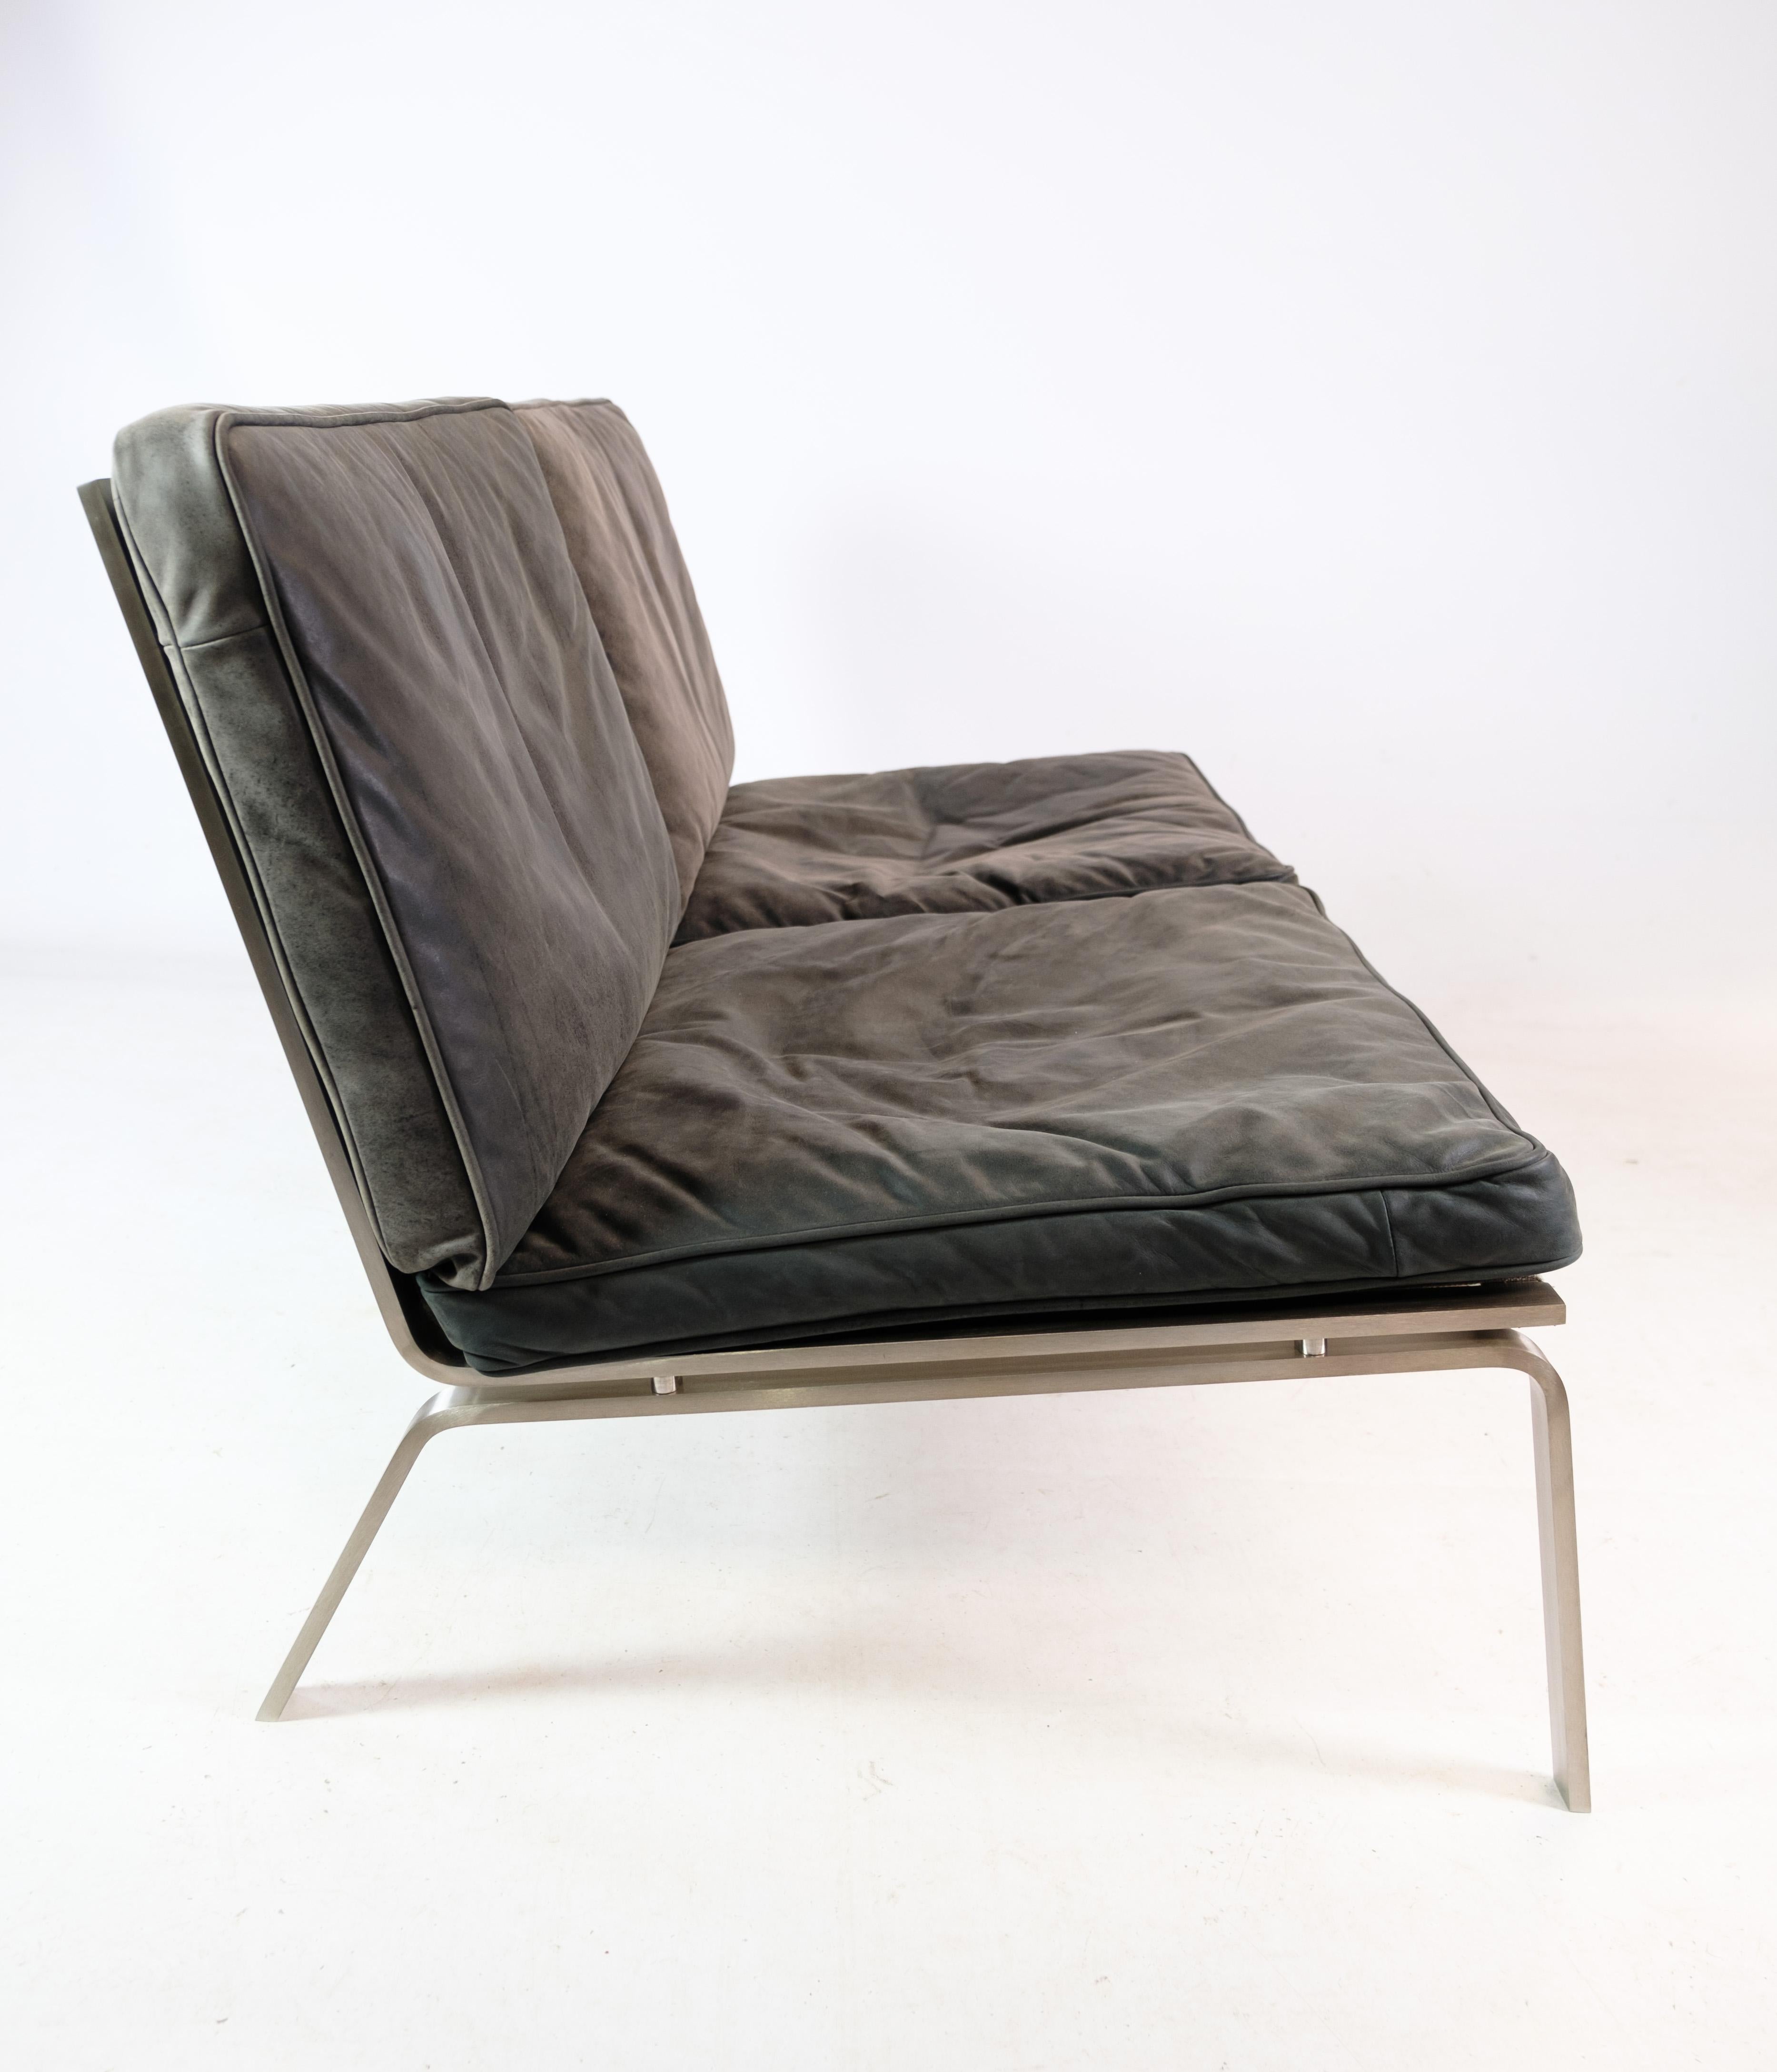 Mid-Century Modern 2-Person Sofa From Norr11 Made With Black Leather Cushions From 2000s For Sale